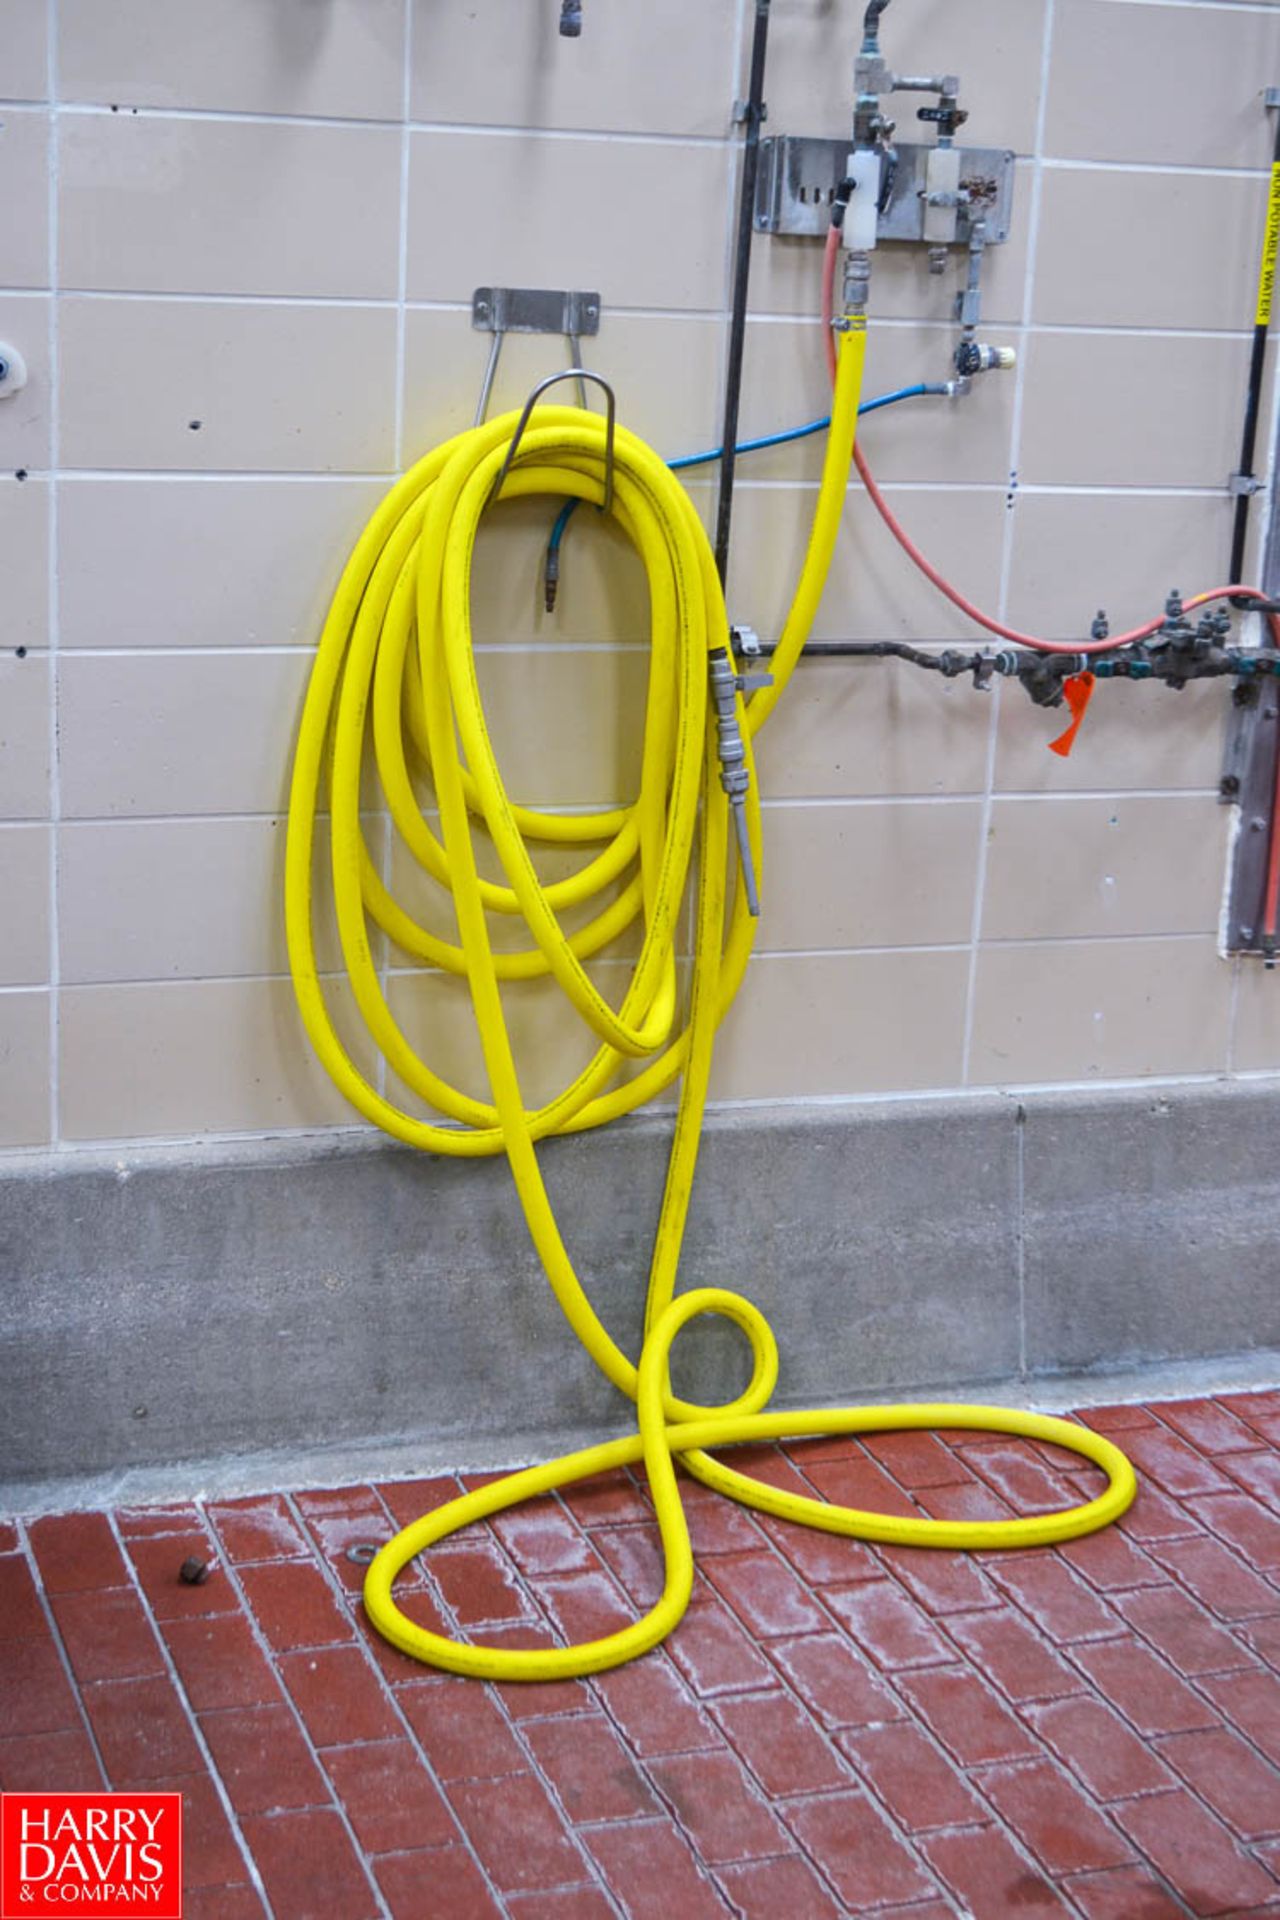 All Yellow Water Hoses On First Floor; Estimated Hundreds Of Feet (No Valves)